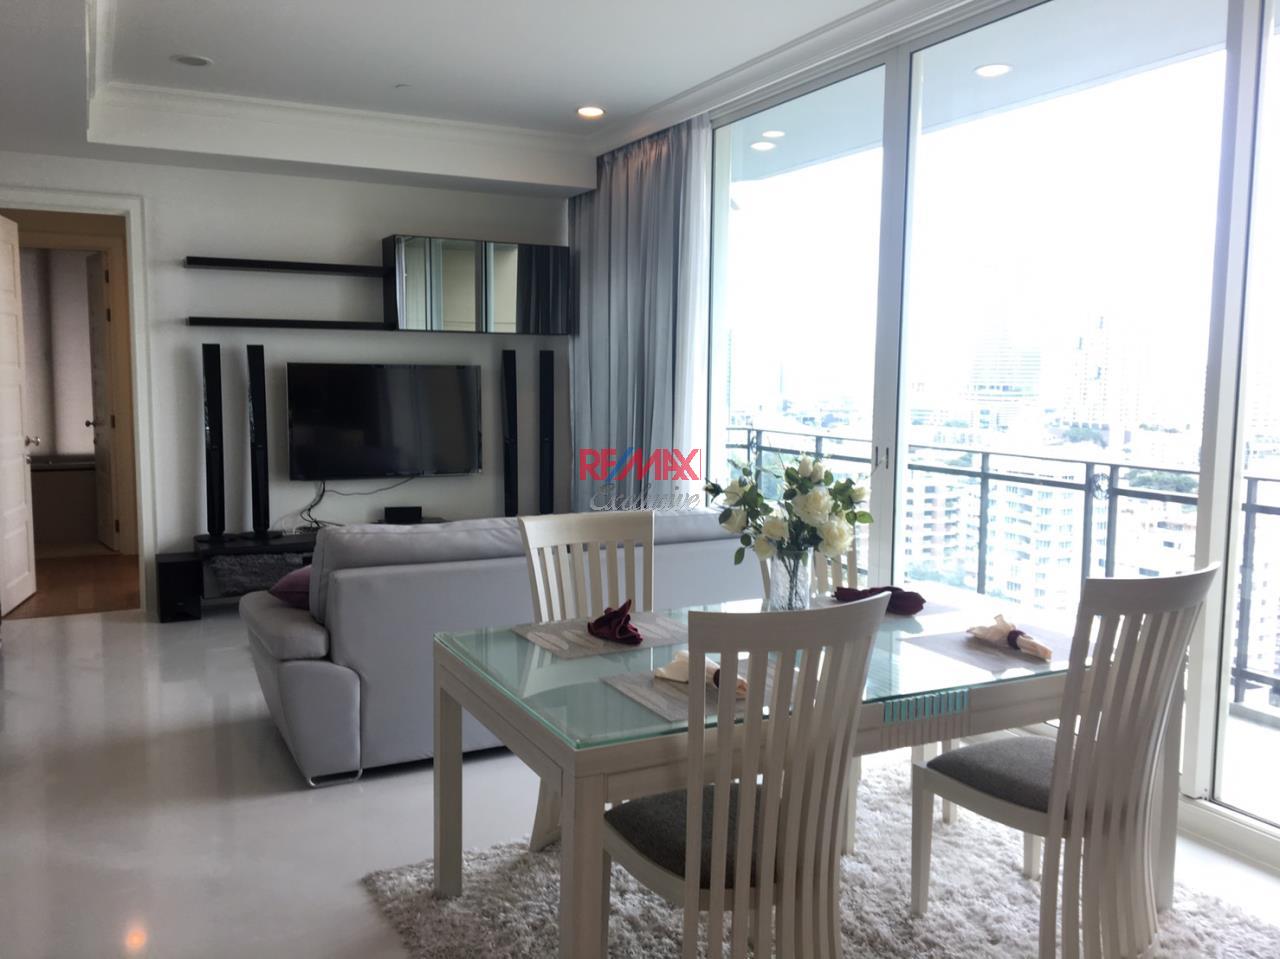 RE/MAX Exclusive Agency's ROYCE RESIDENCE, 2 BEDROOM, 112 SQM - FOR RENT 80,000 THB 1